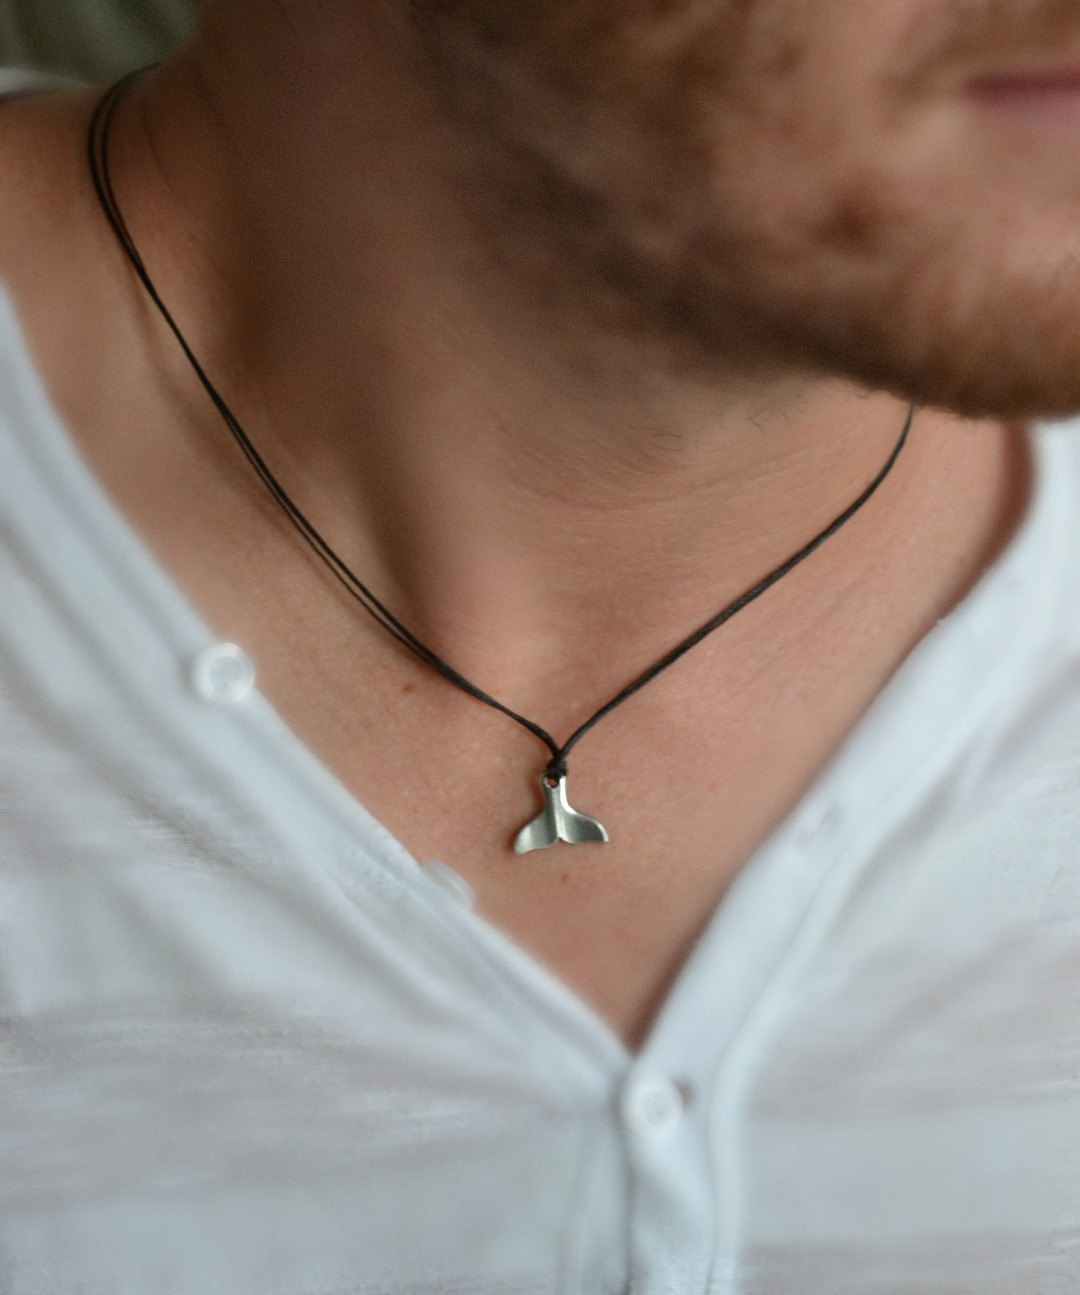 Whale Tail Necklace For Men- Men's Necklace With A Silver Plated Whale Tail Pendant And A Black Cord, Gift For Him, Flipper Charm